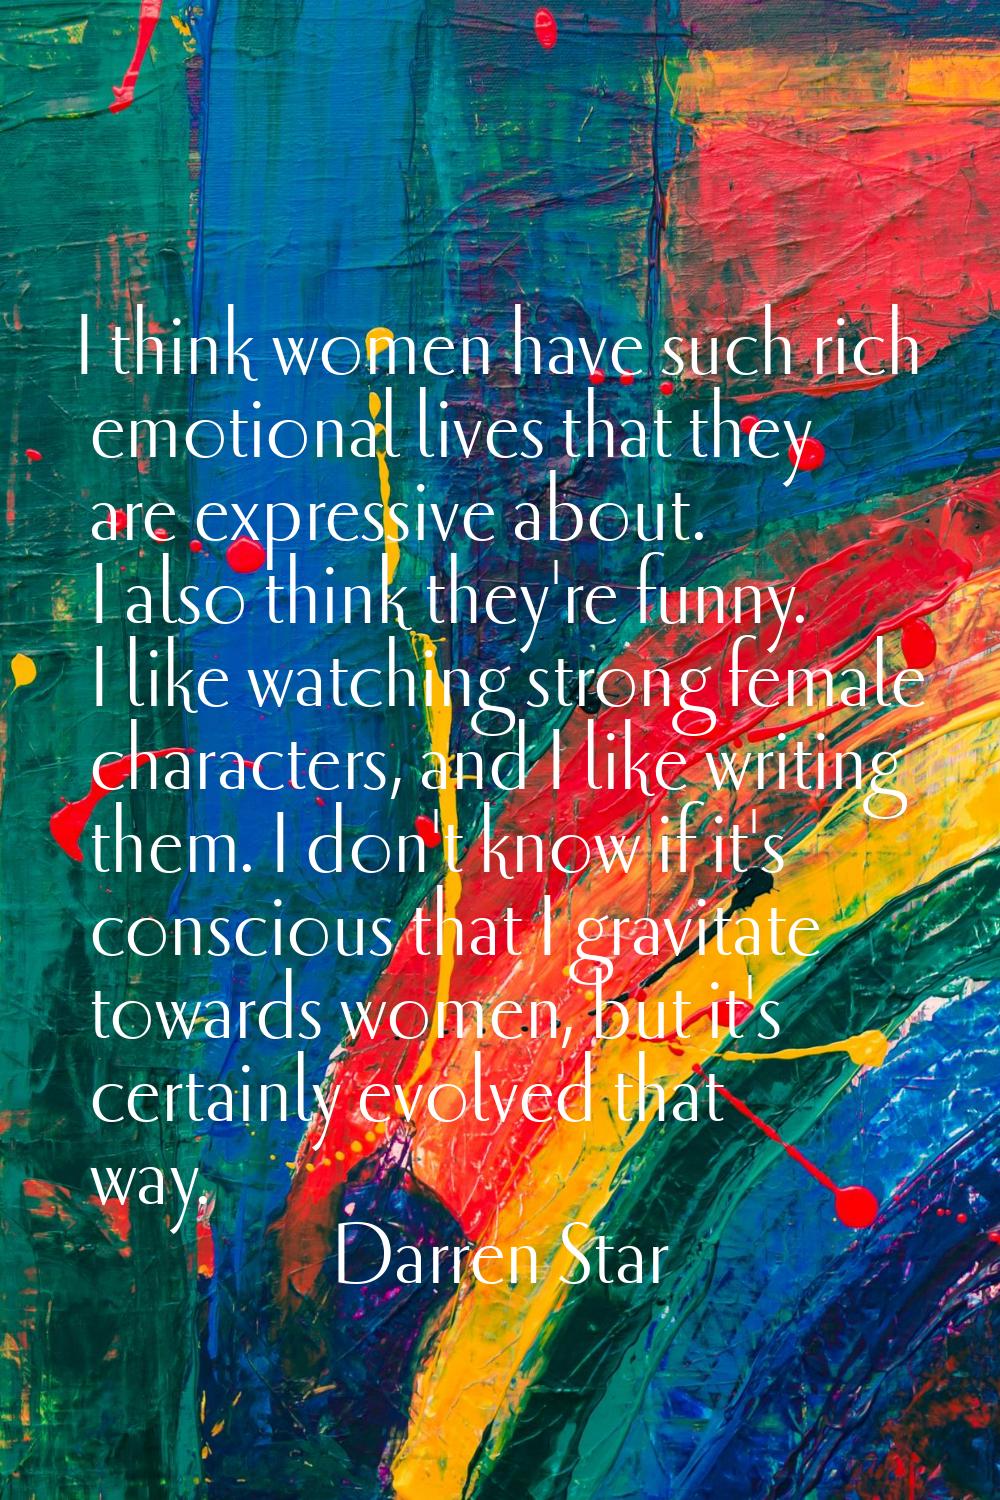 I think women have such rich emotional lives that they are expressive about. I also think they're f